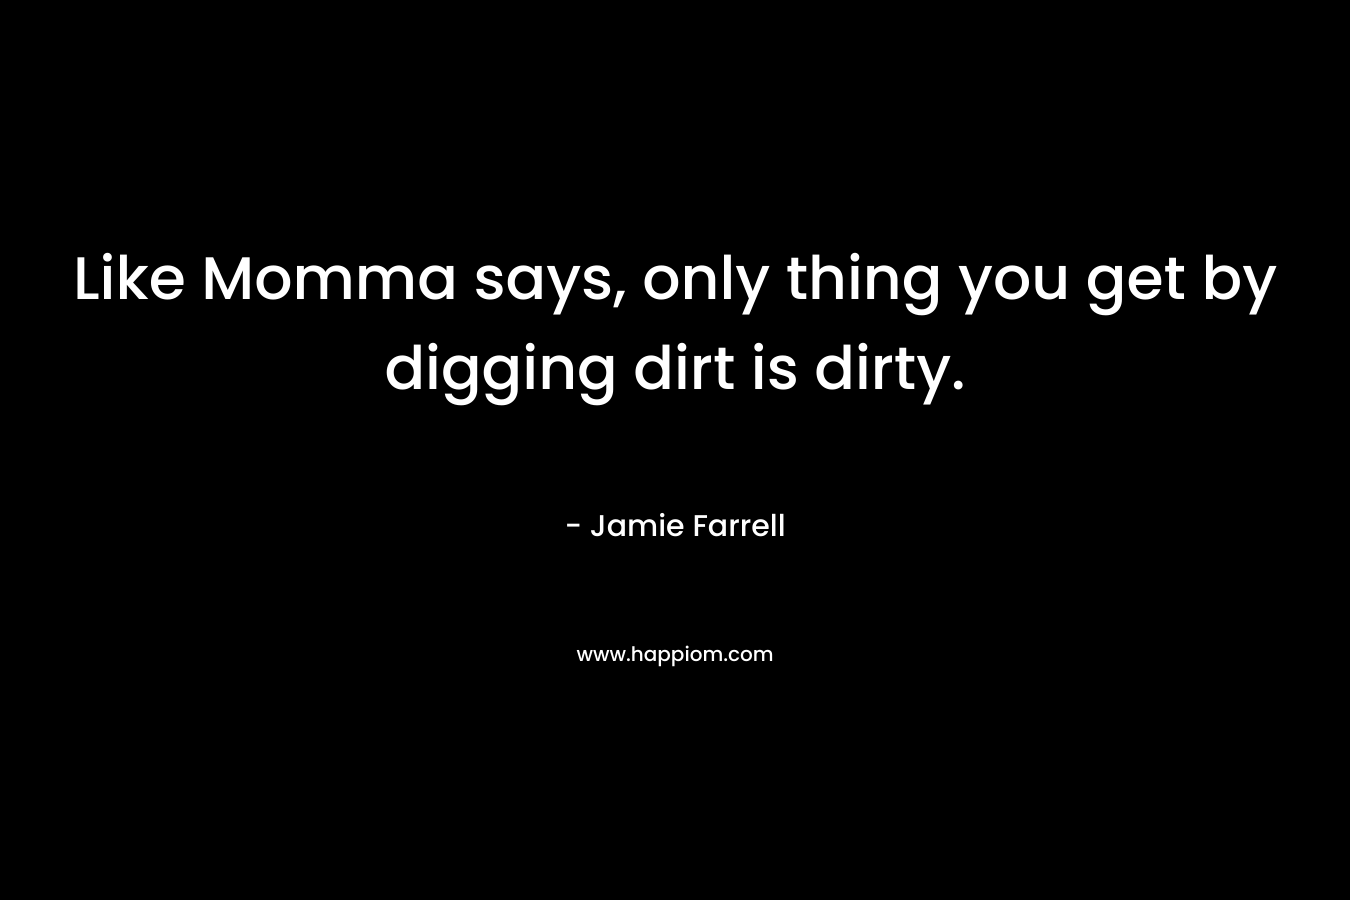 Like Momma says, only thing you get by digging dirt is dirty. – Jamie Farrell